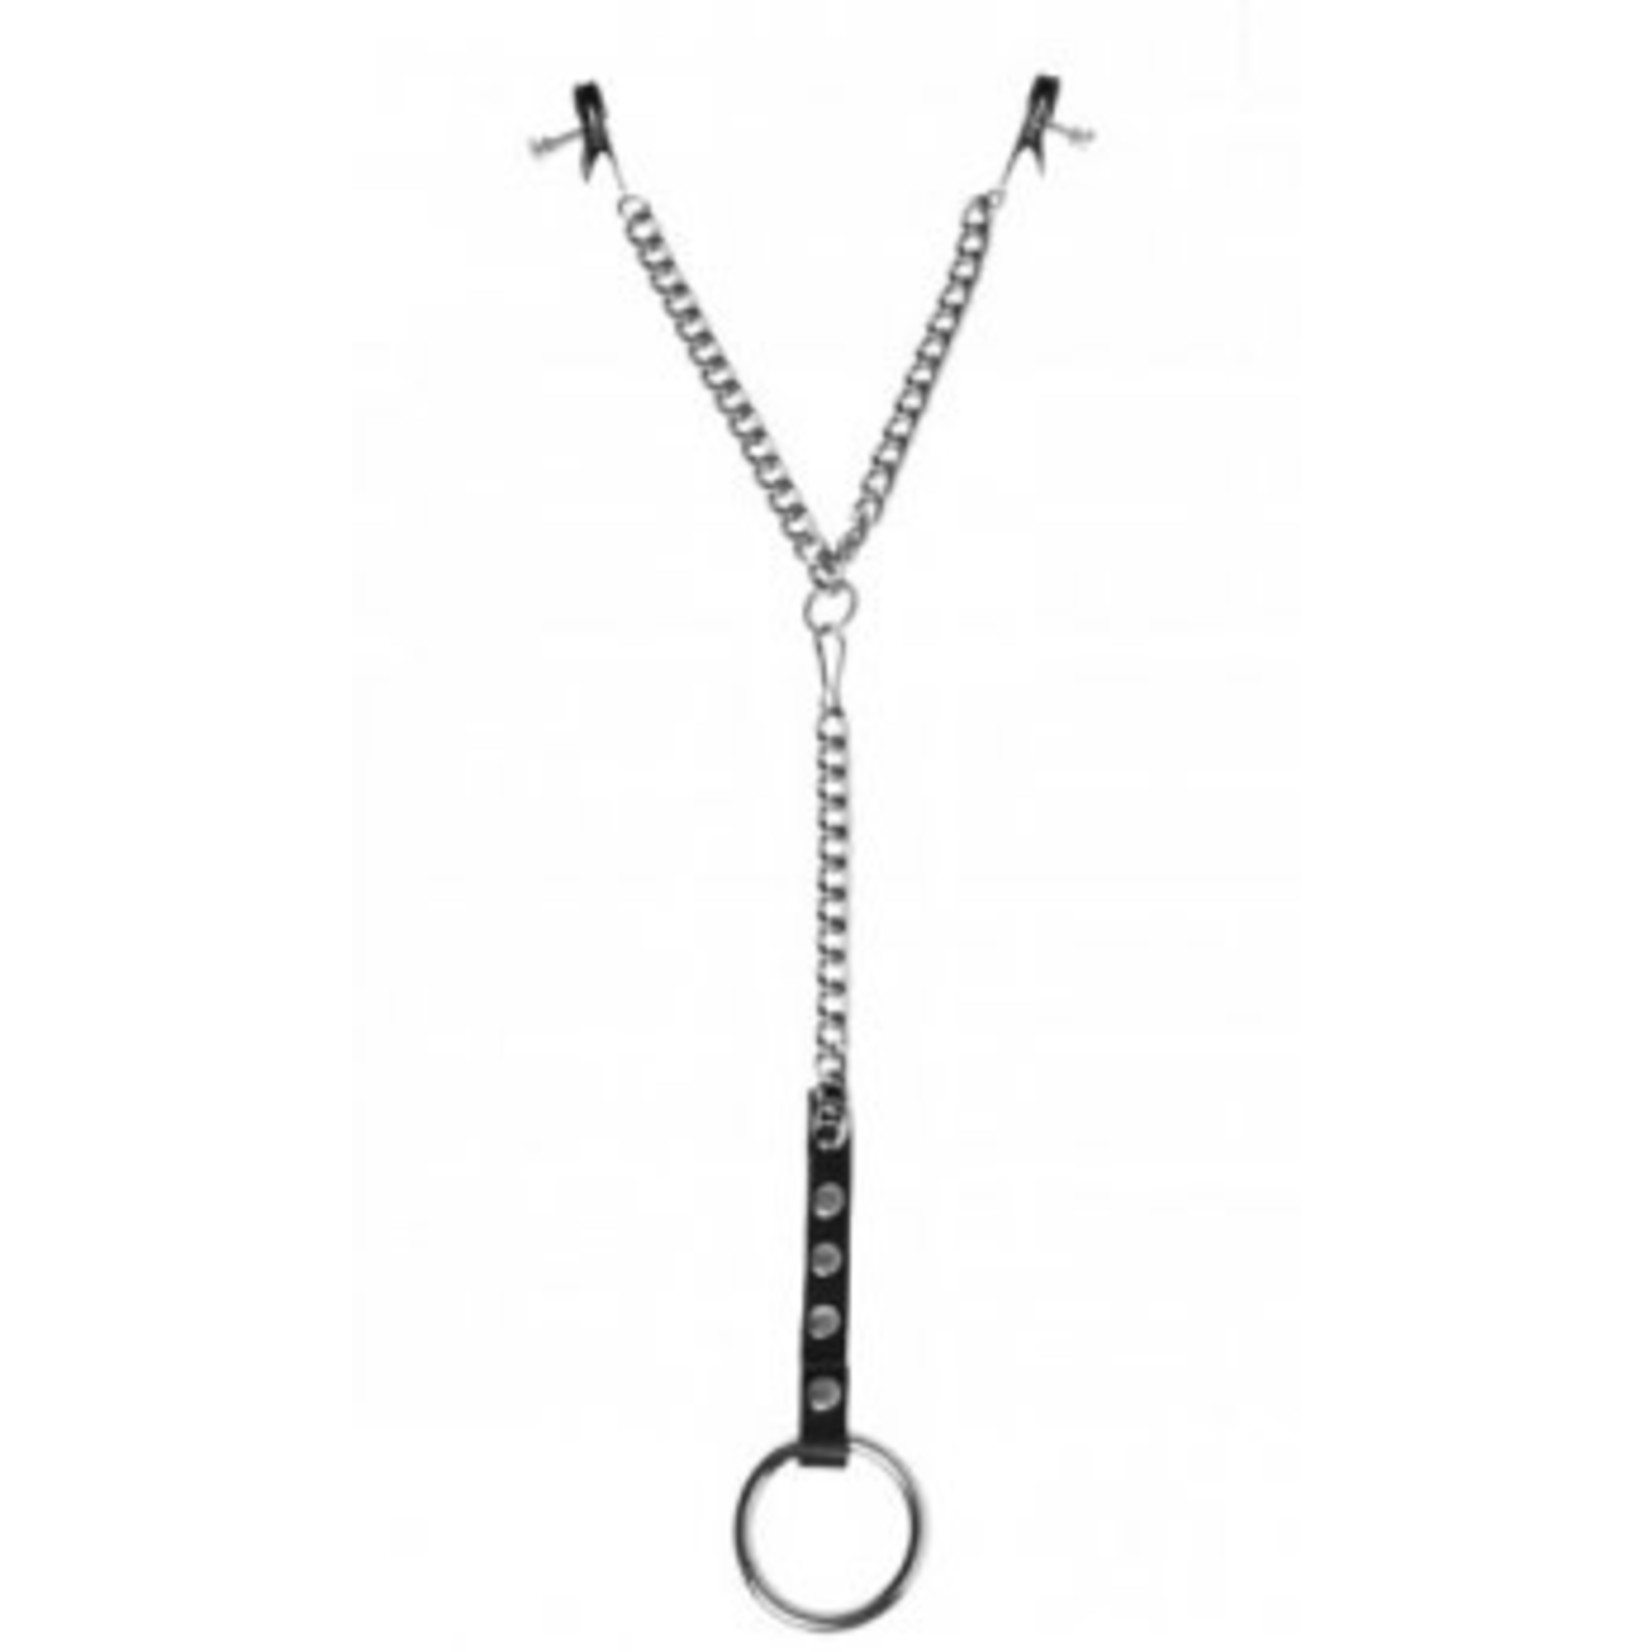 MASTER SERIES MASTER SERIES - NIPPLE CLAMPS AND COCK RING SET